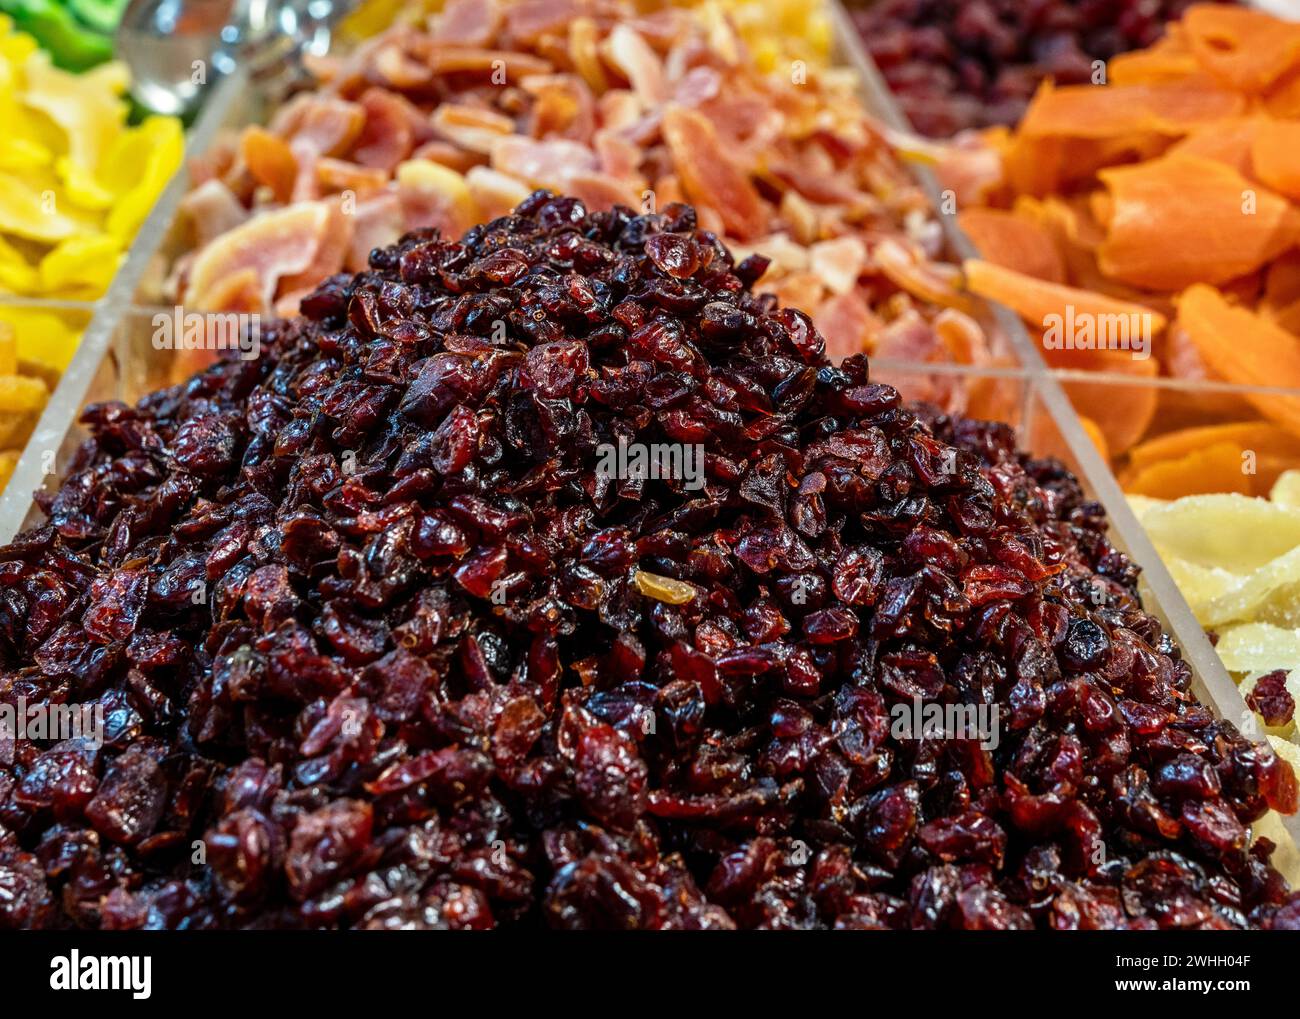 Detail Photo Grapes And Spices Stock Photo